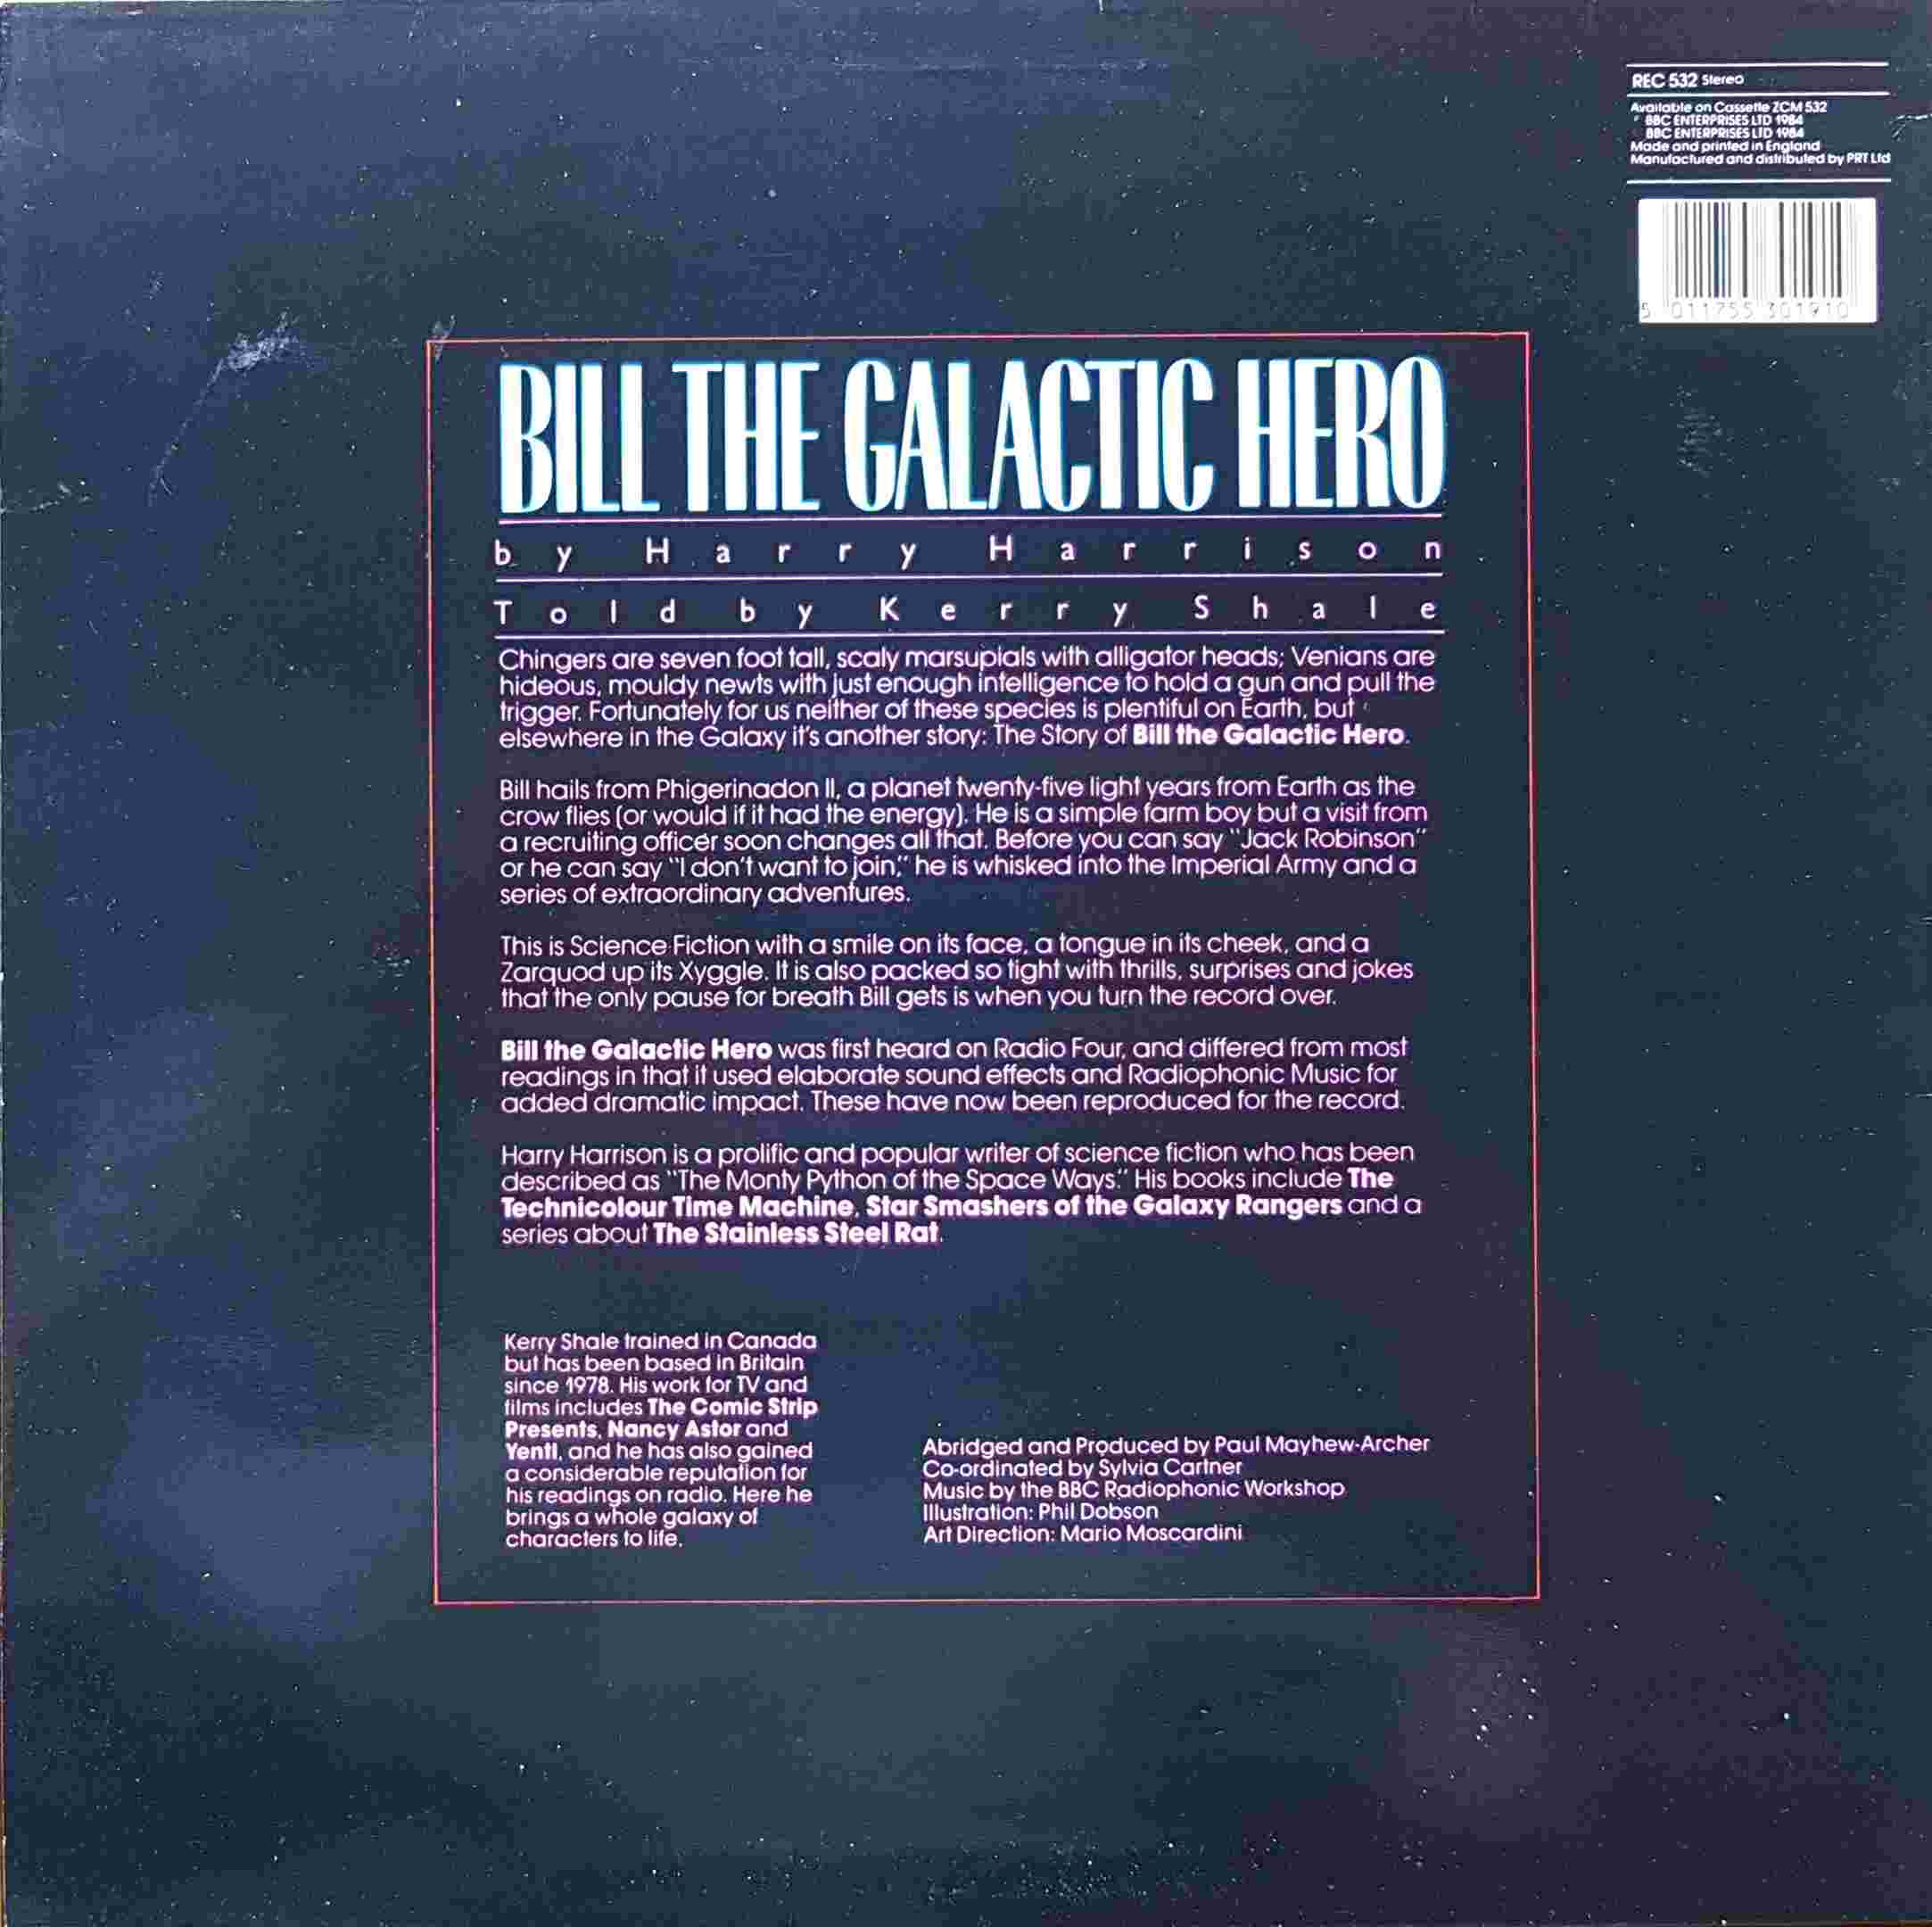 Picture of REC 532 Bill the galactic hero by artist Kerry Shale from the BBC records and Tapes library